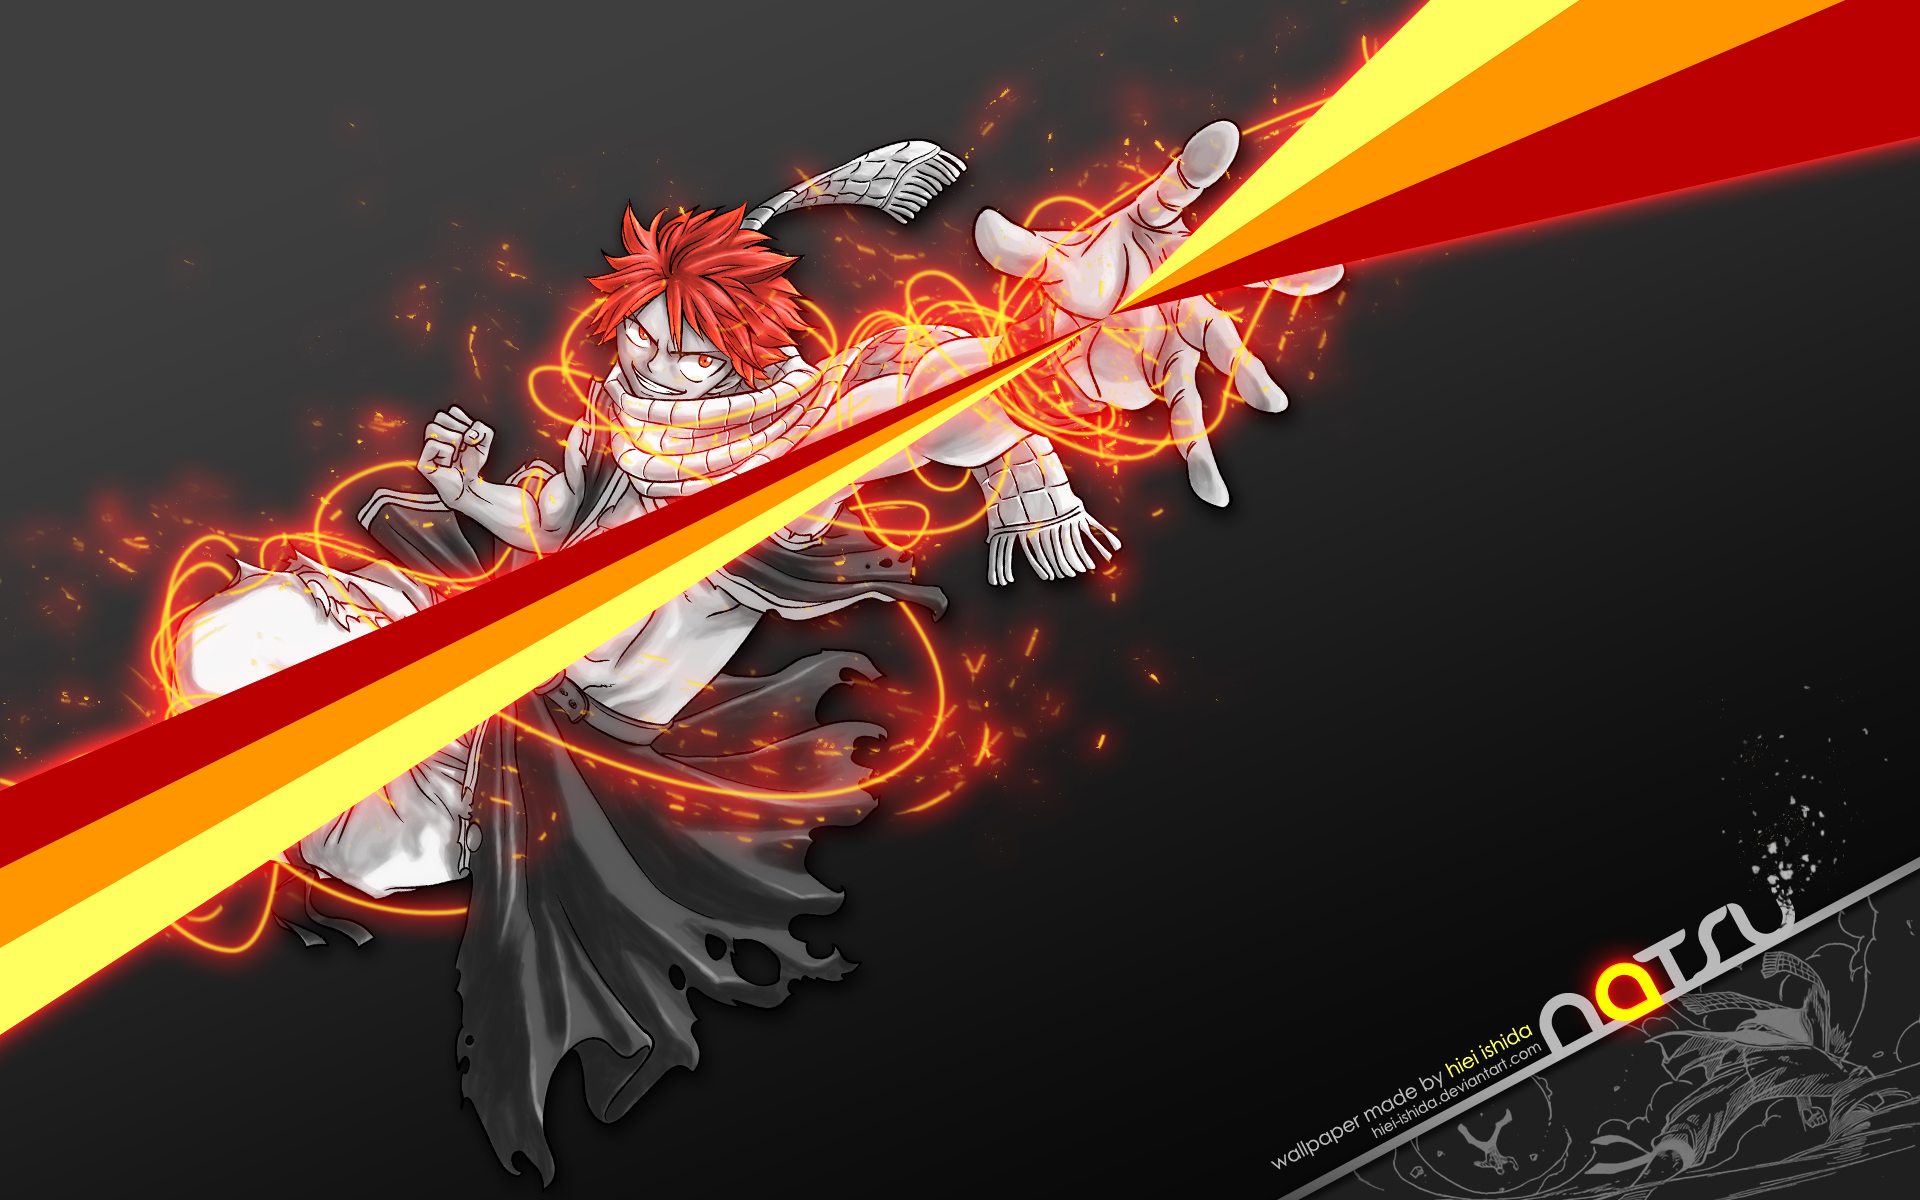 Desktop wallpaper featuring Natsu Dragneel from Fairy Tail anime.